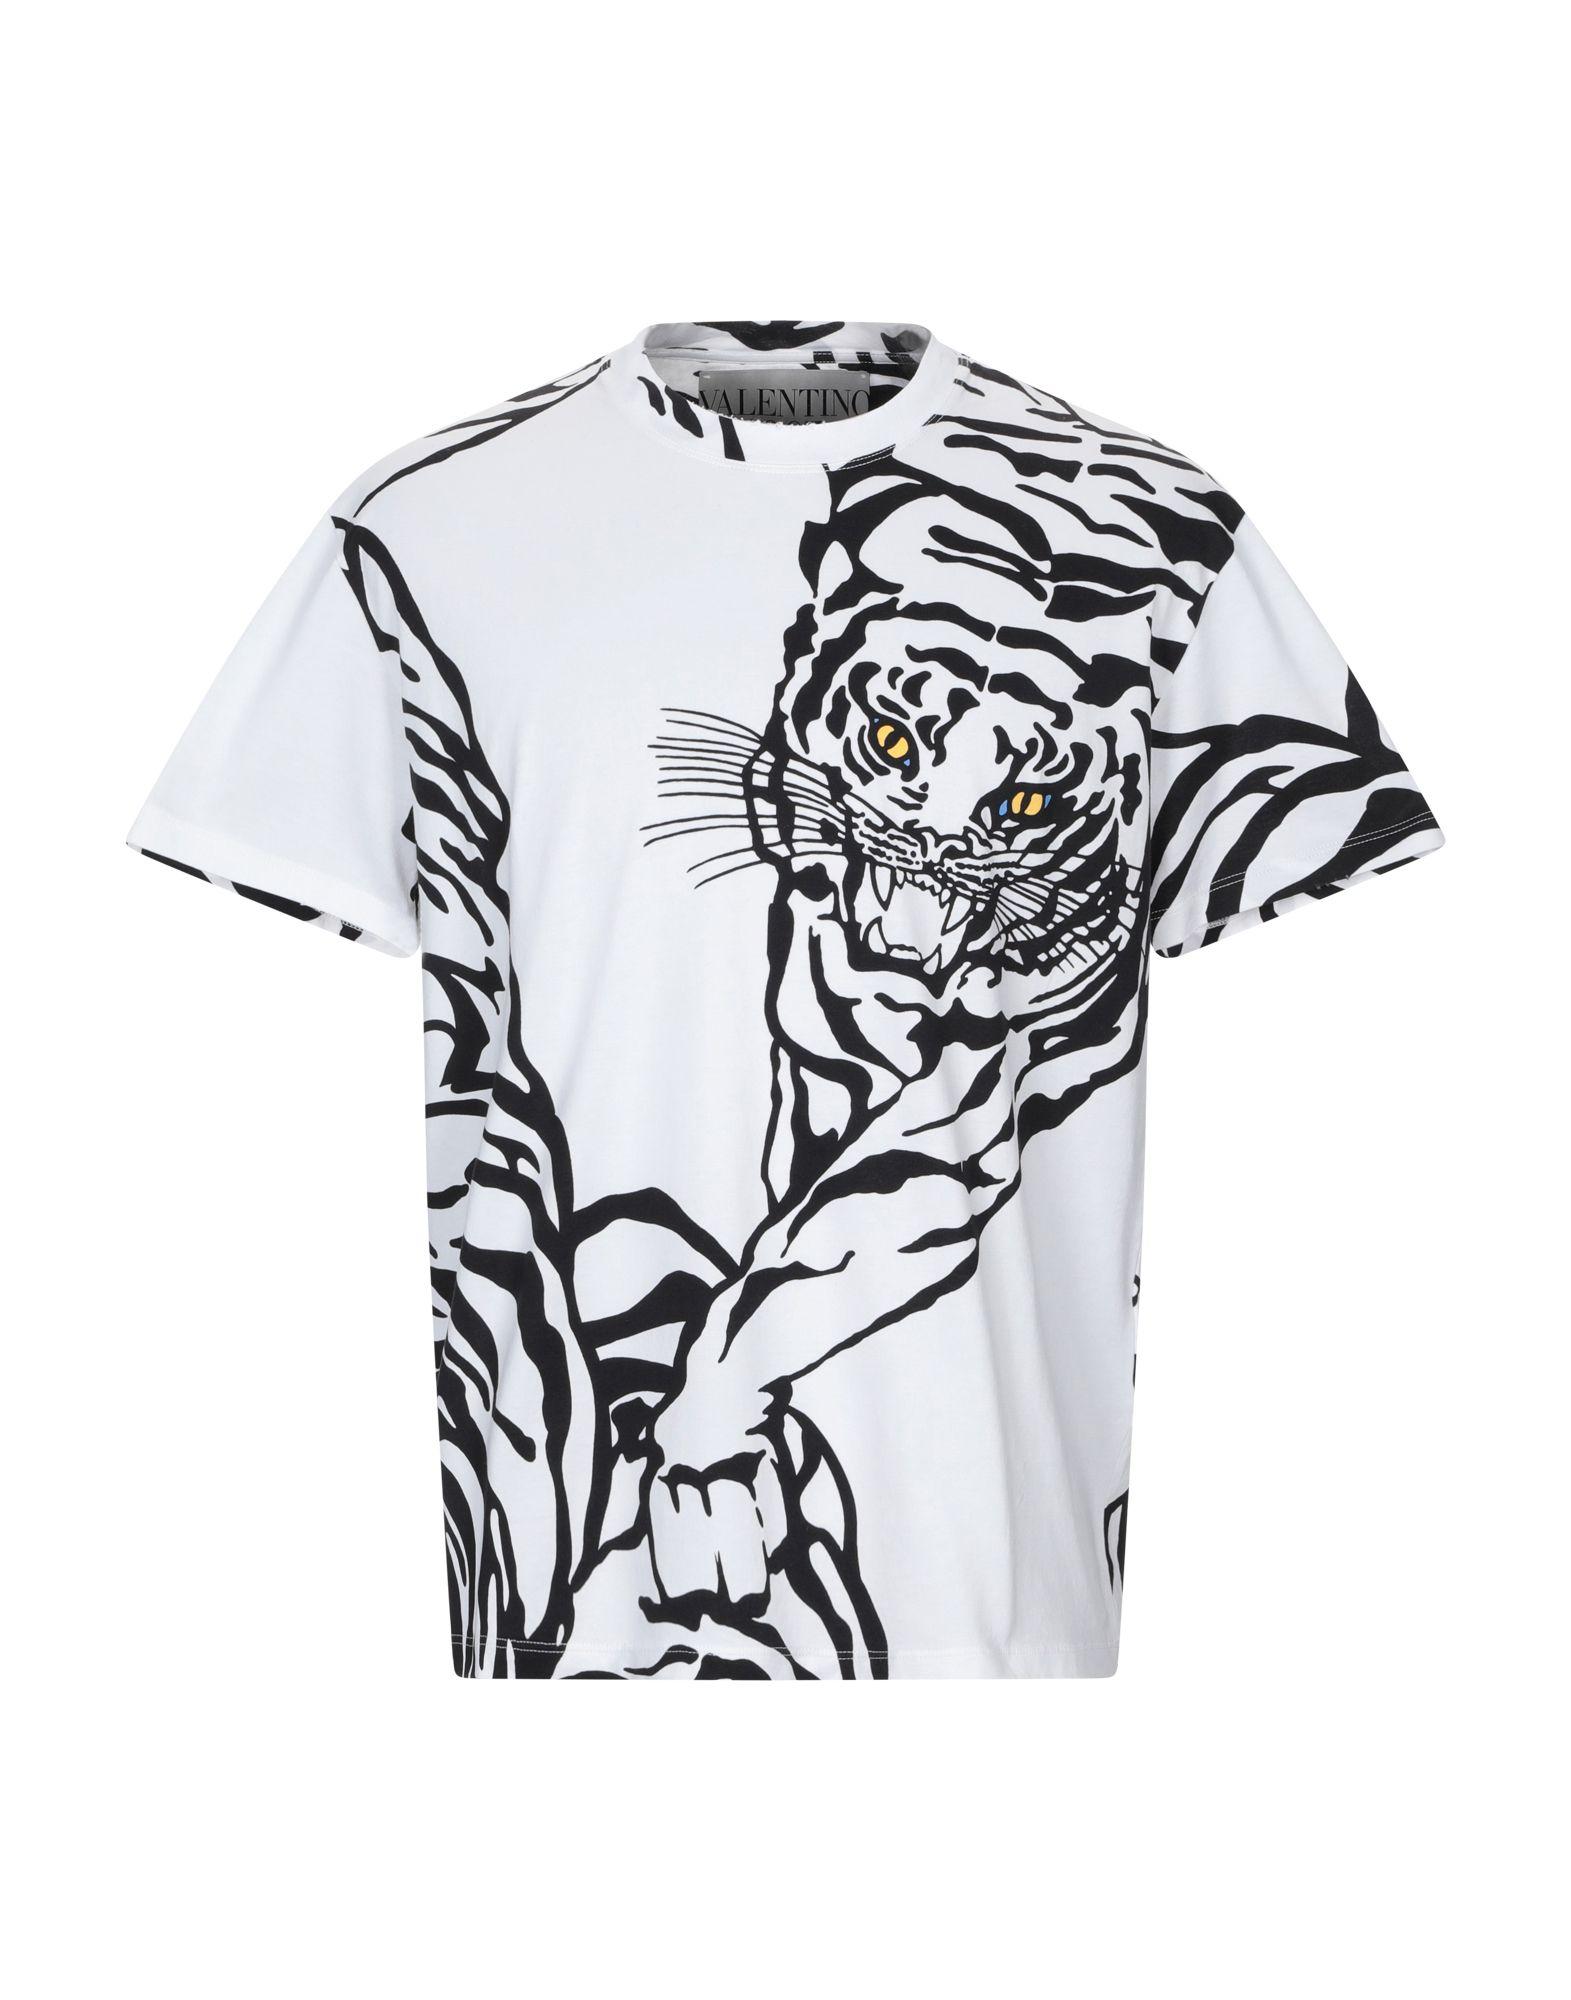 Valentino Cotton Tiger Print T-shirt in Ivory (White) for Men - Save 46 ...